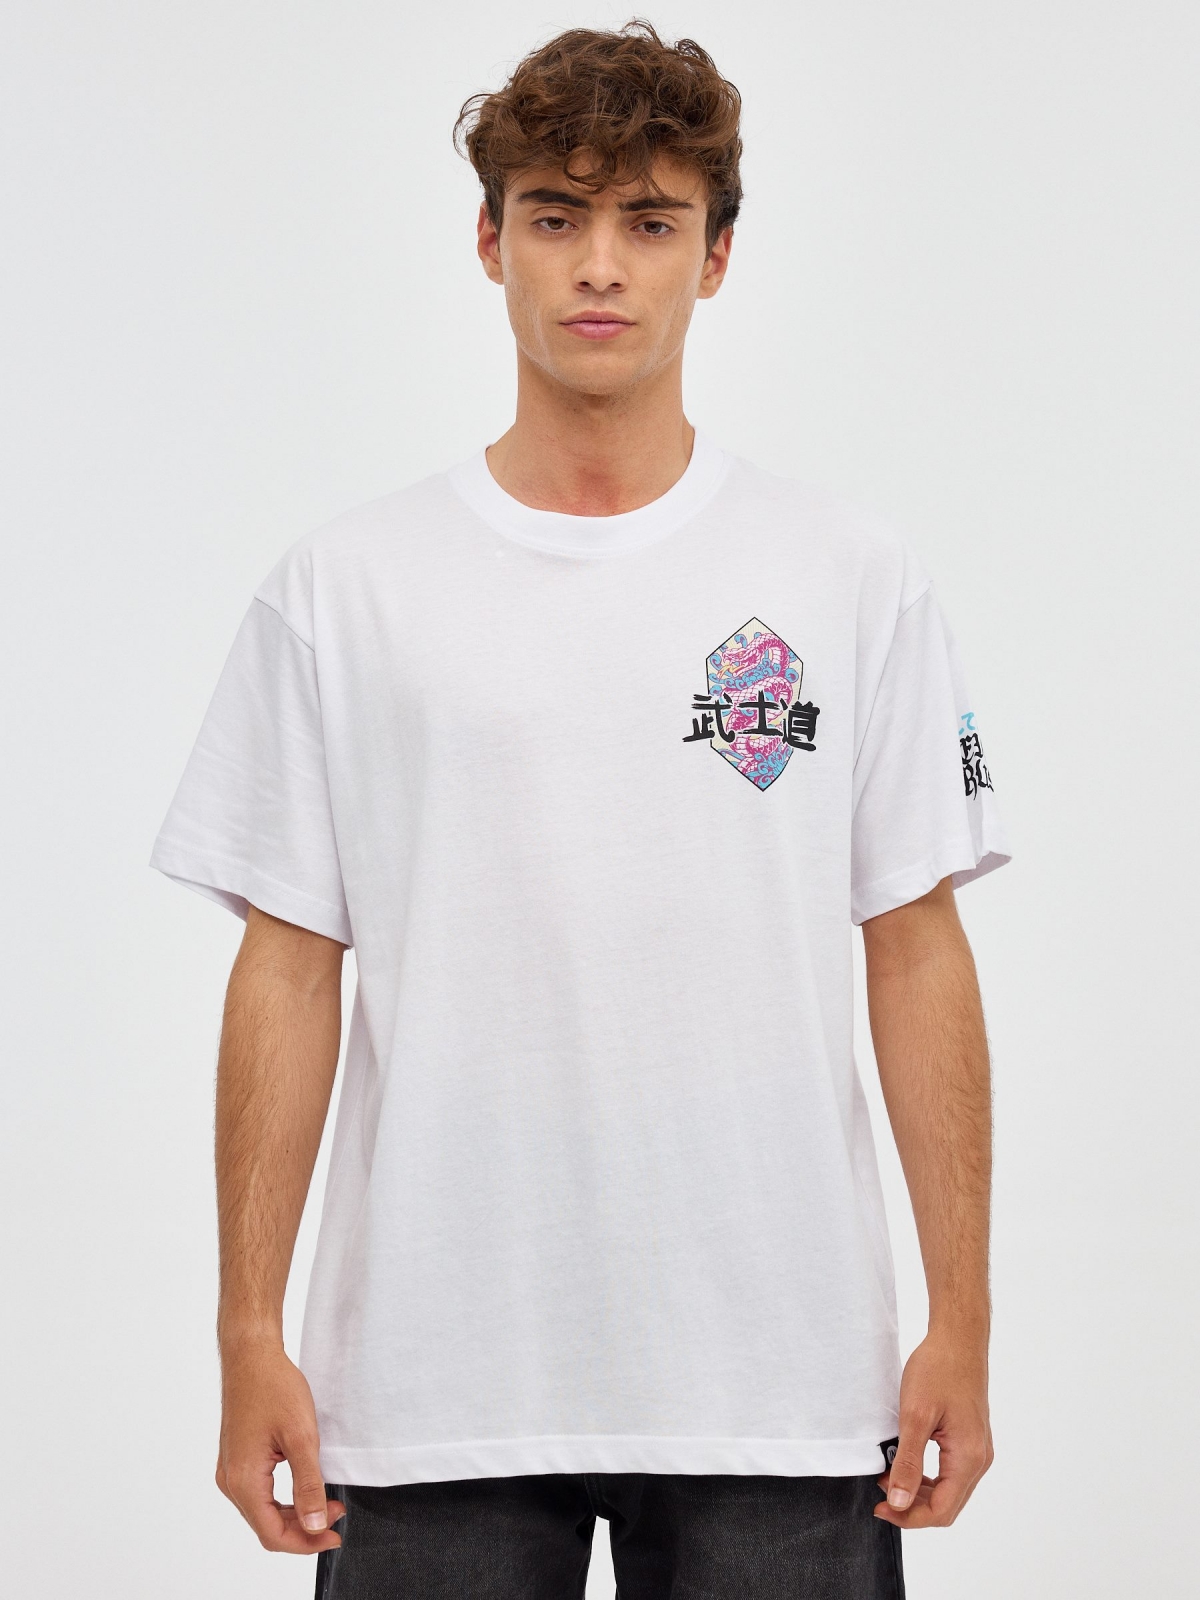 Japanese print T-shirt white middle front view